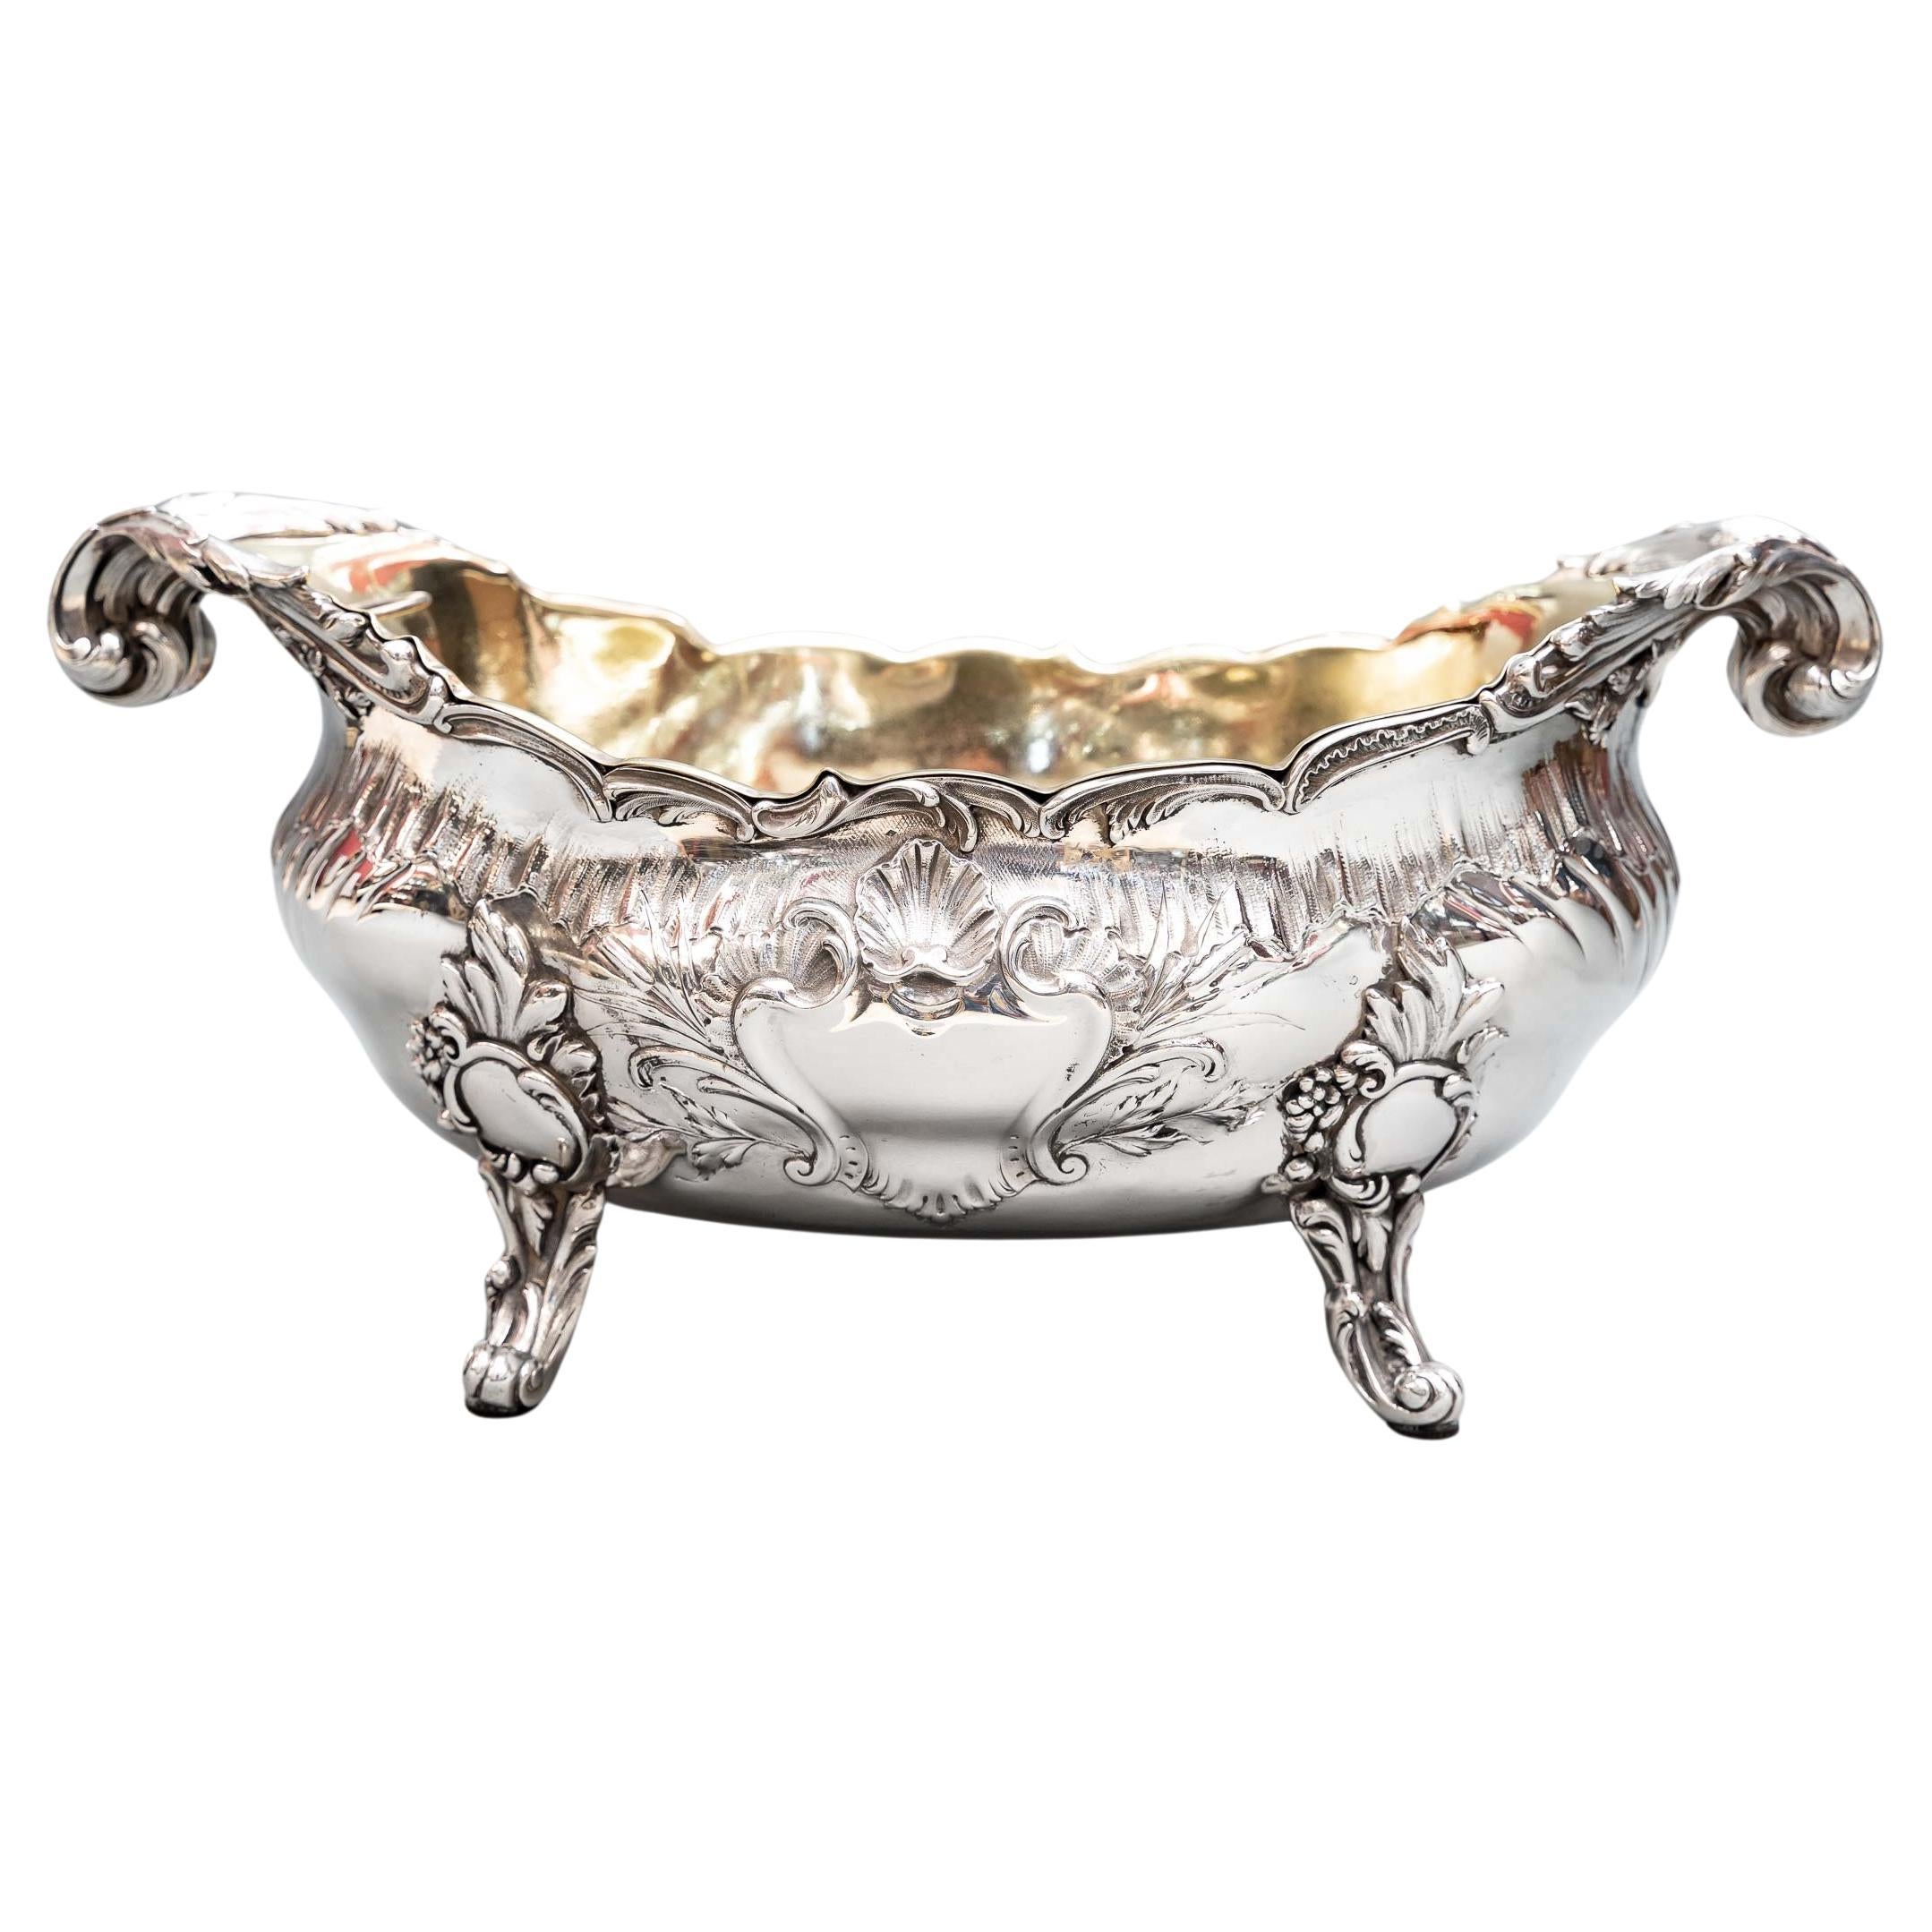 Goldsmith: j.b. Francois - important 19th century solid silver planter For Sale